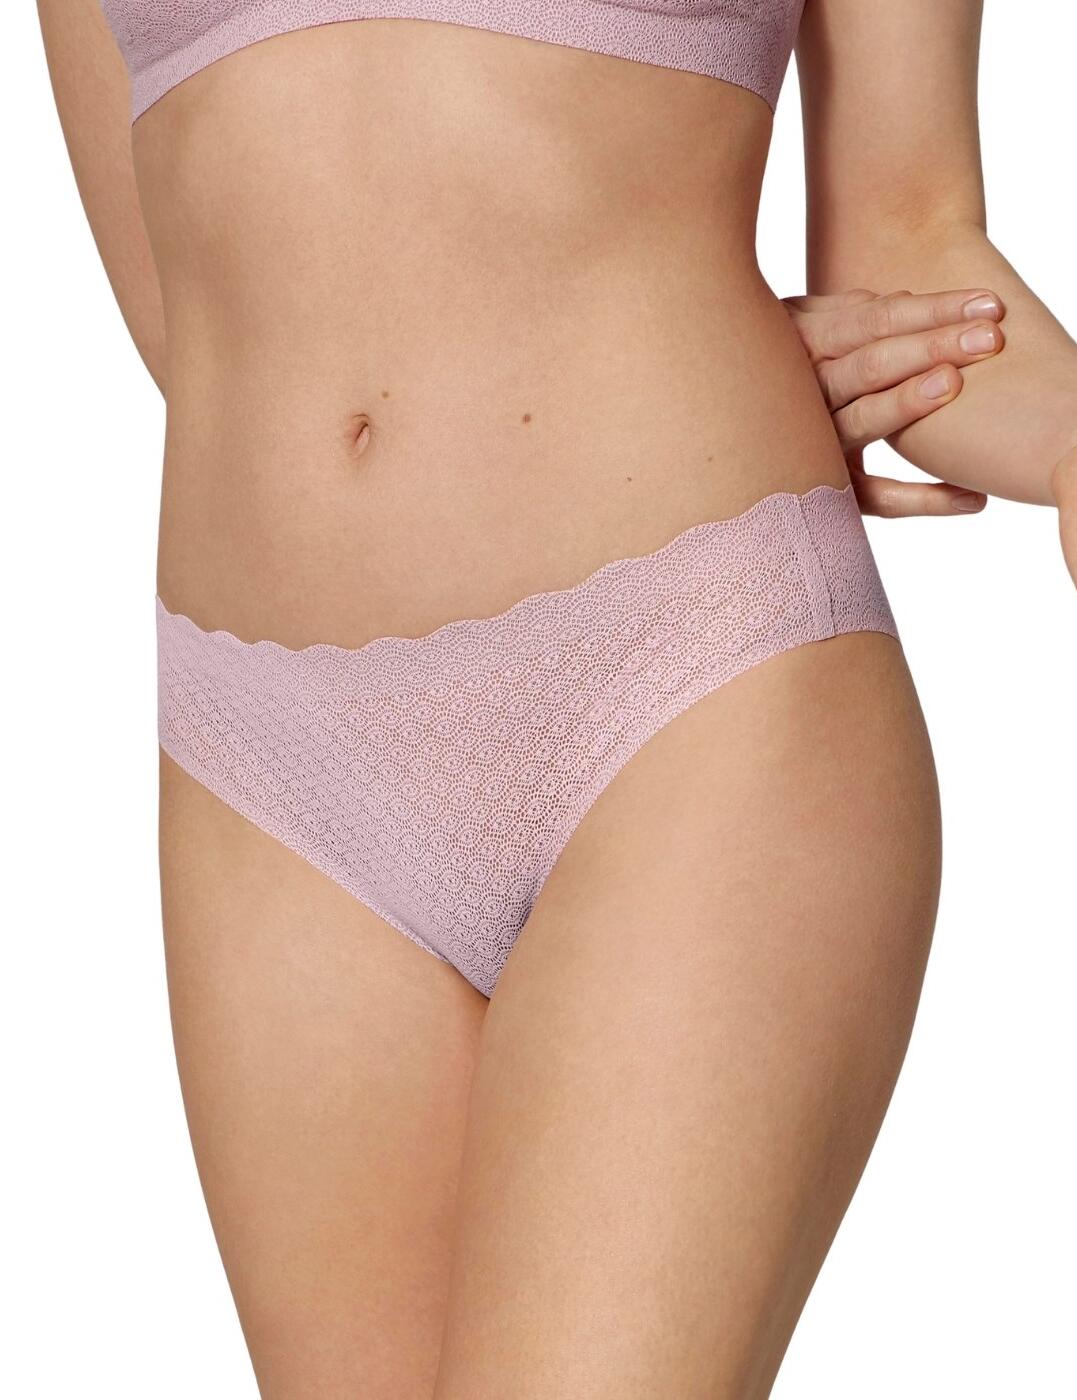 Buy Sloggi Zero Feel Lace 2.0 High Waist Knickers from Next Luxembourg